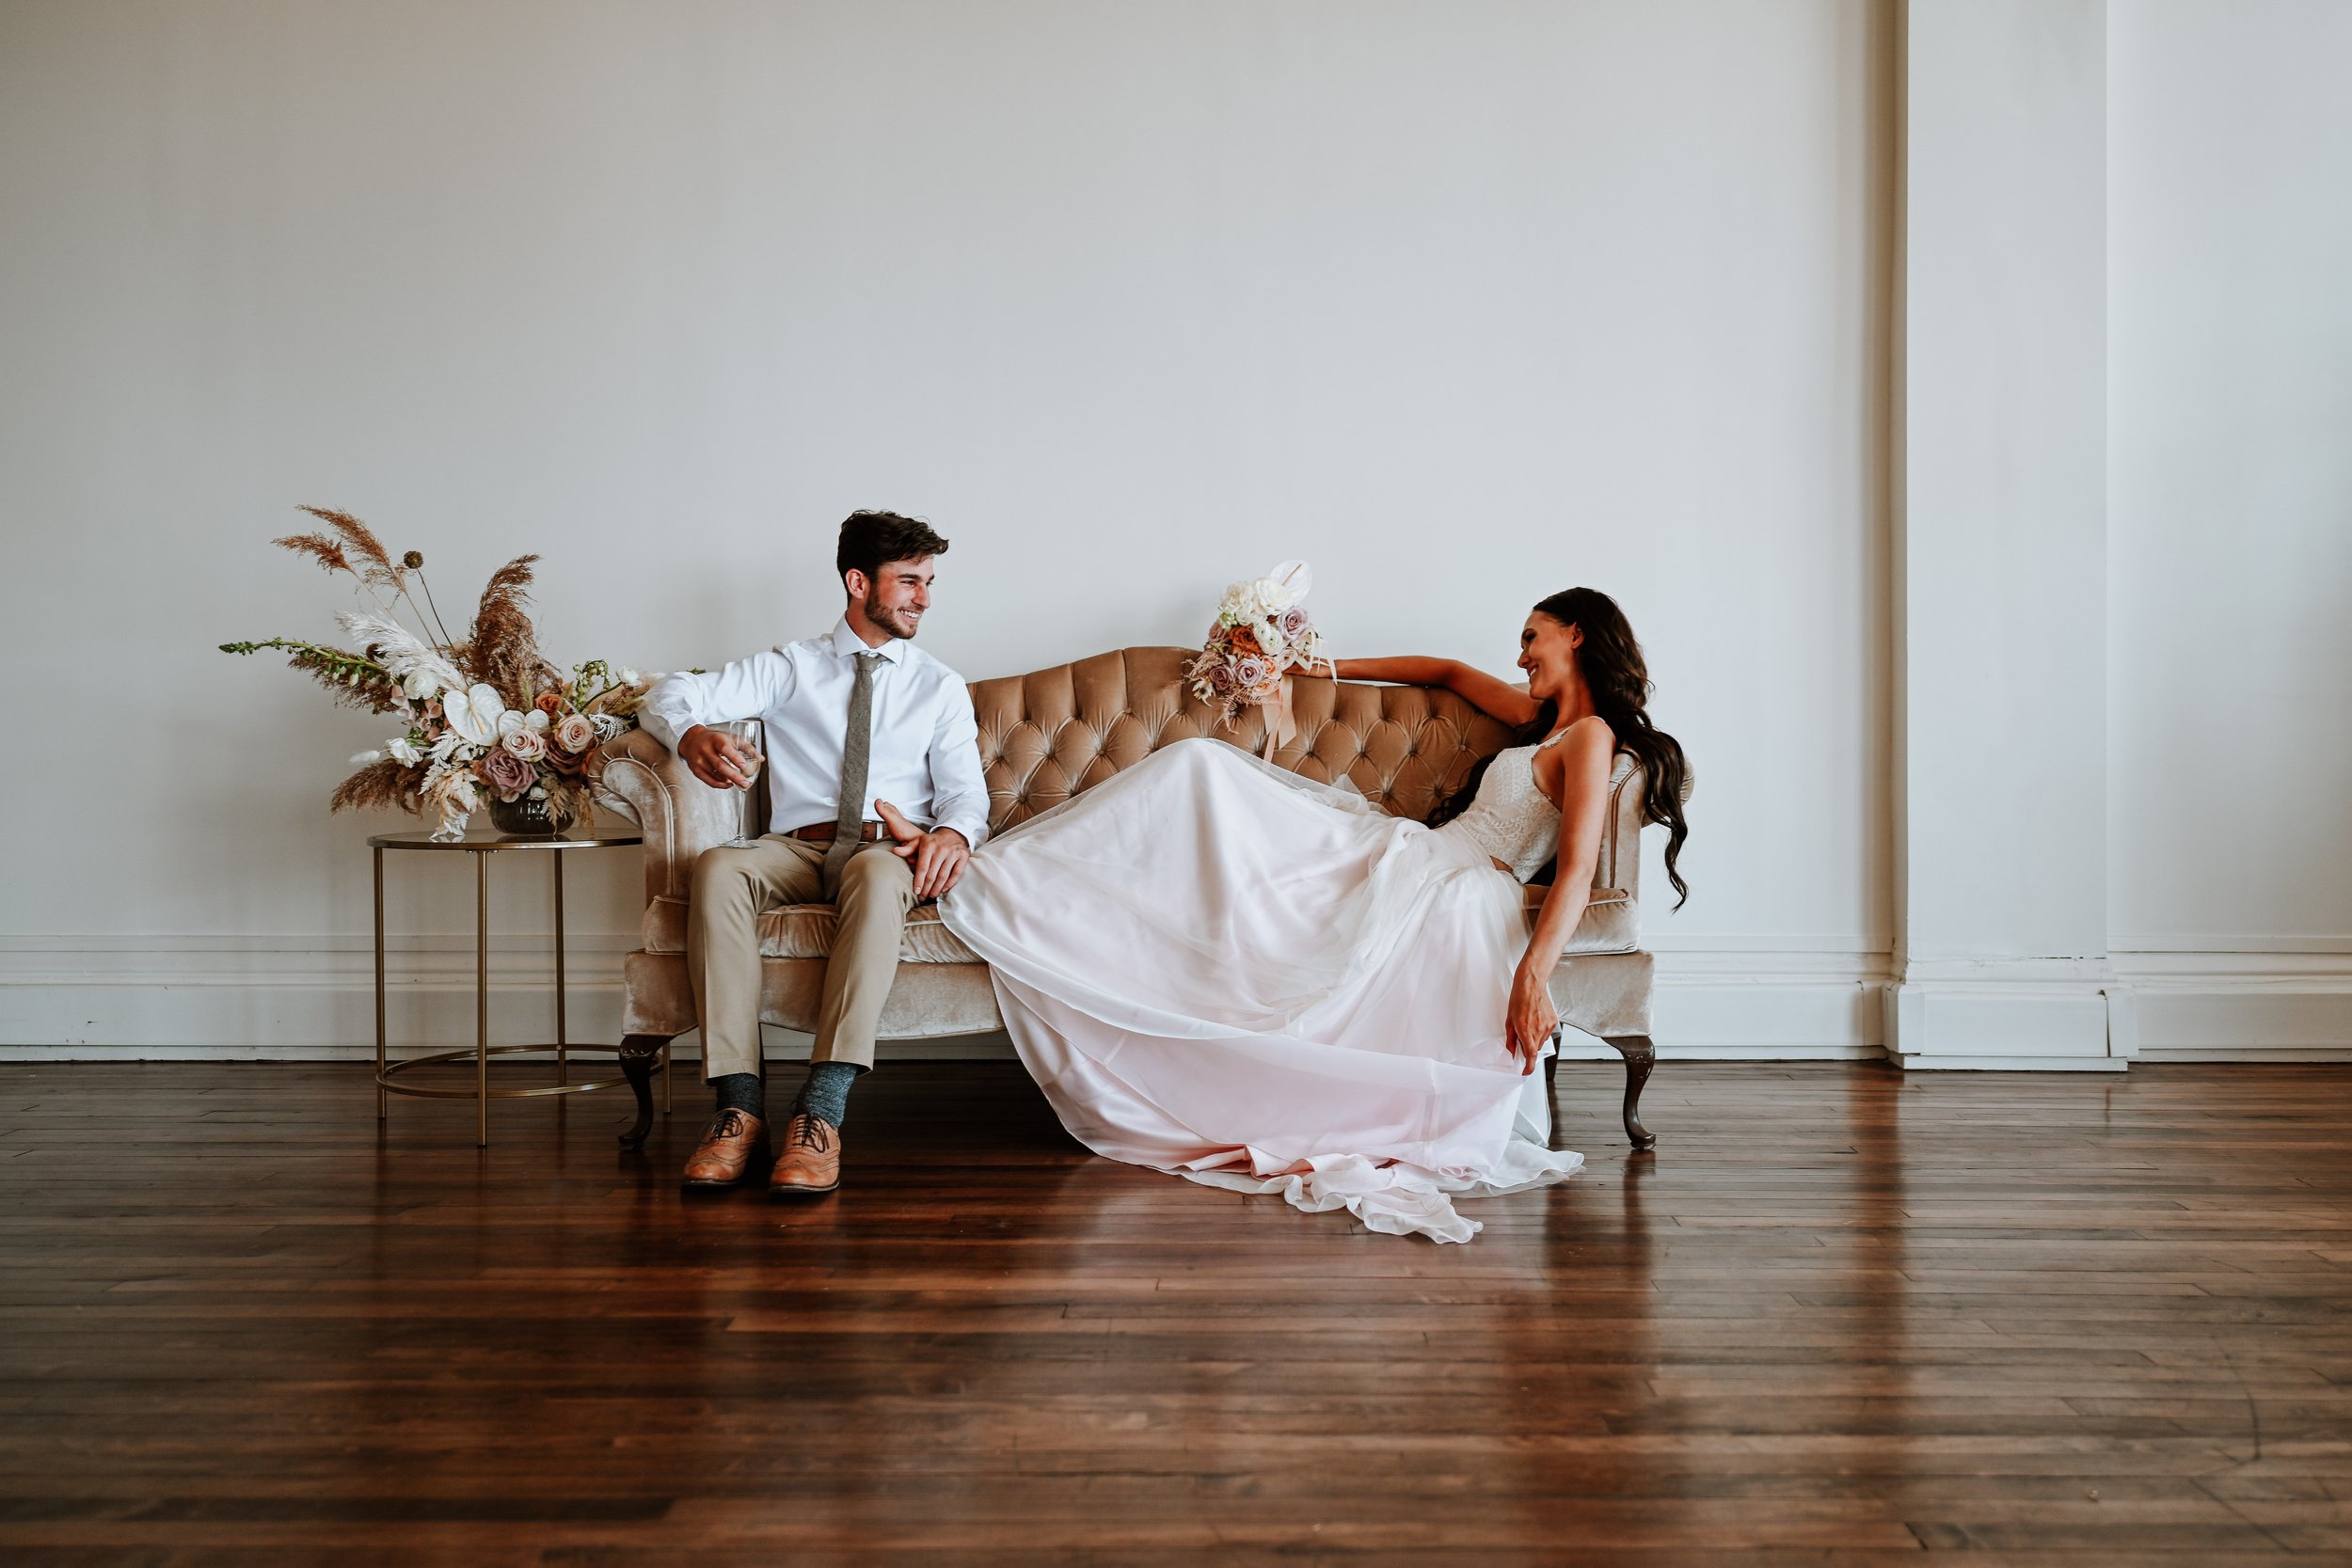 Couple sitting together on a couch for some time alone at their wedding.